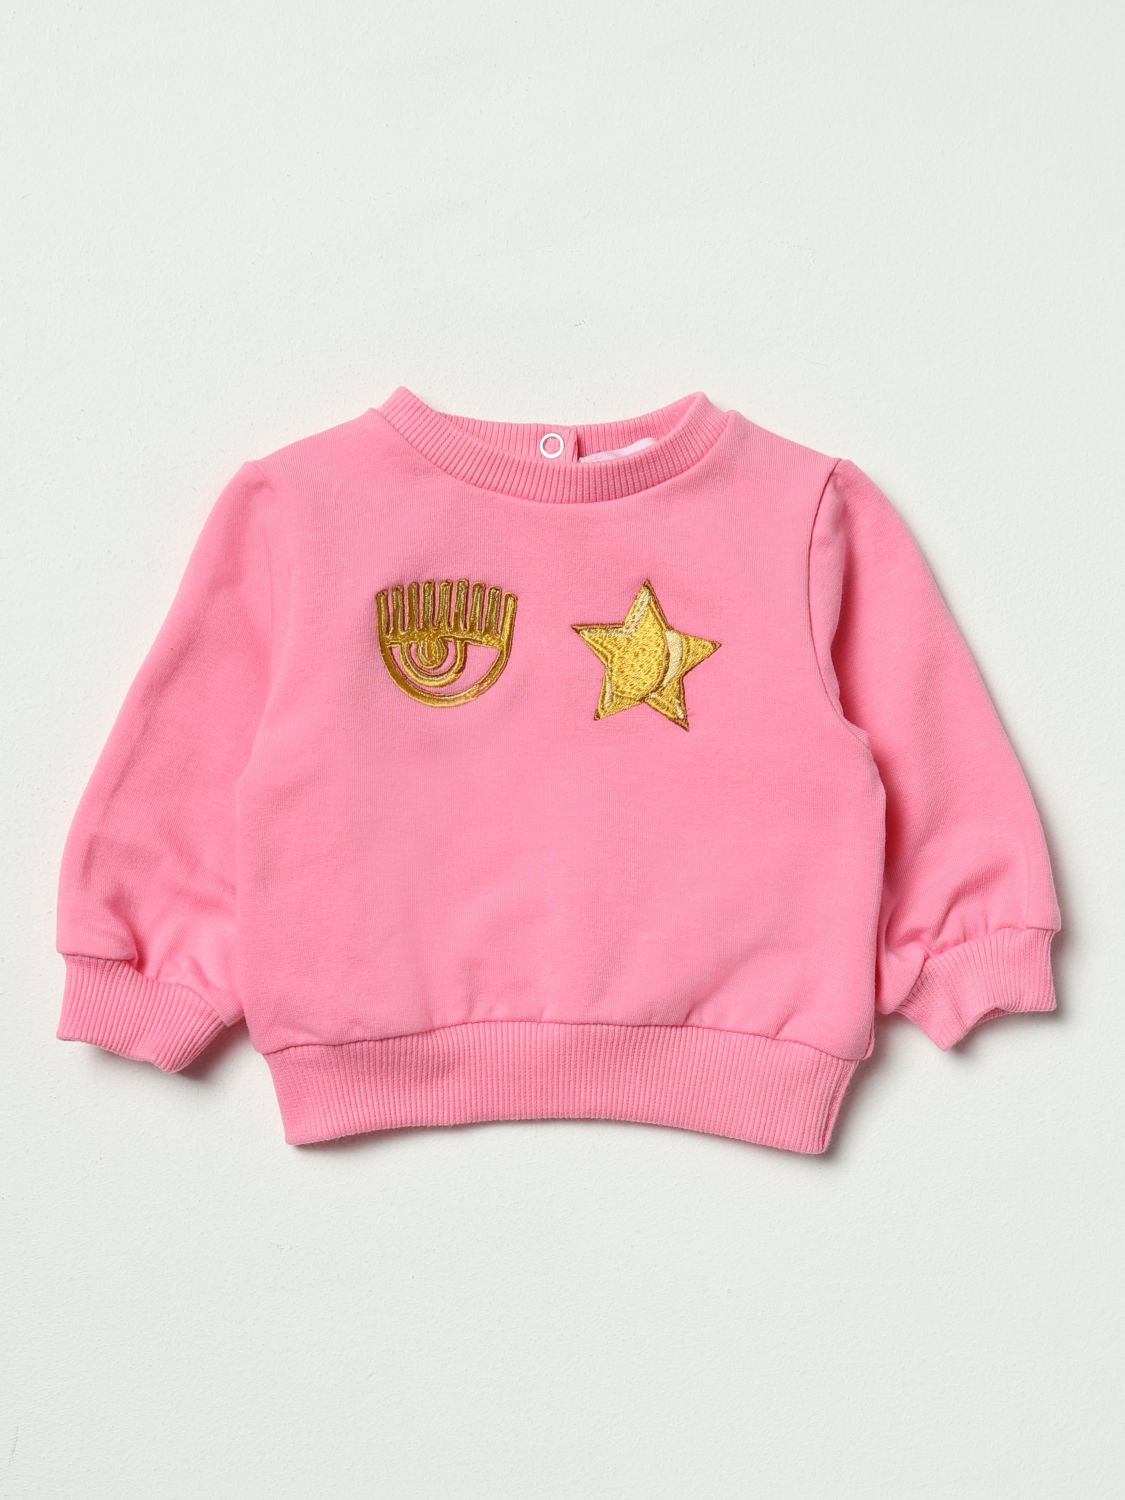 Sweater Chiara Ferragni: Chiara Ferragni sweater for baby pink 1